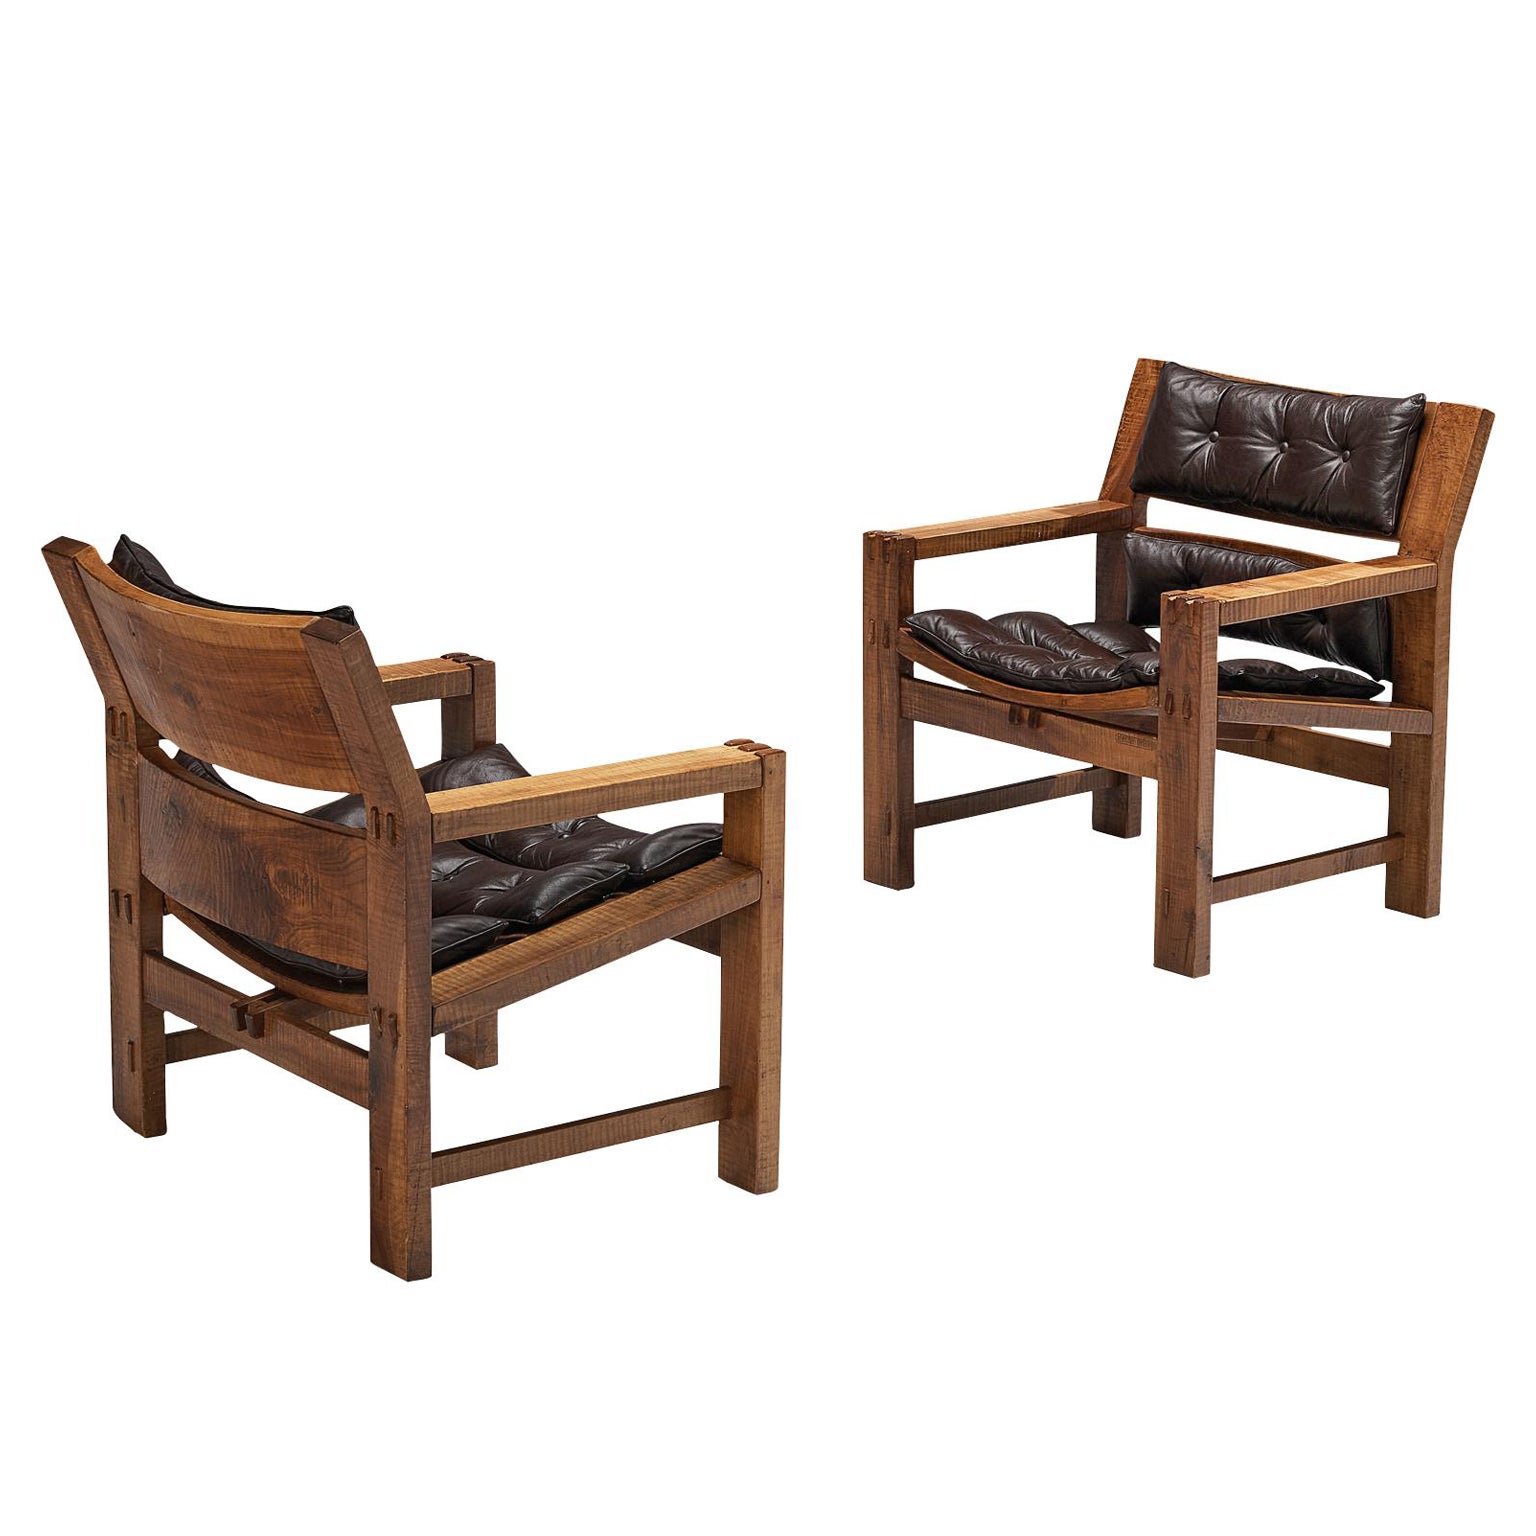 Giuseppe Rivadossi for Officina Rivadossi Pair of Lounge Chairs in Walnut